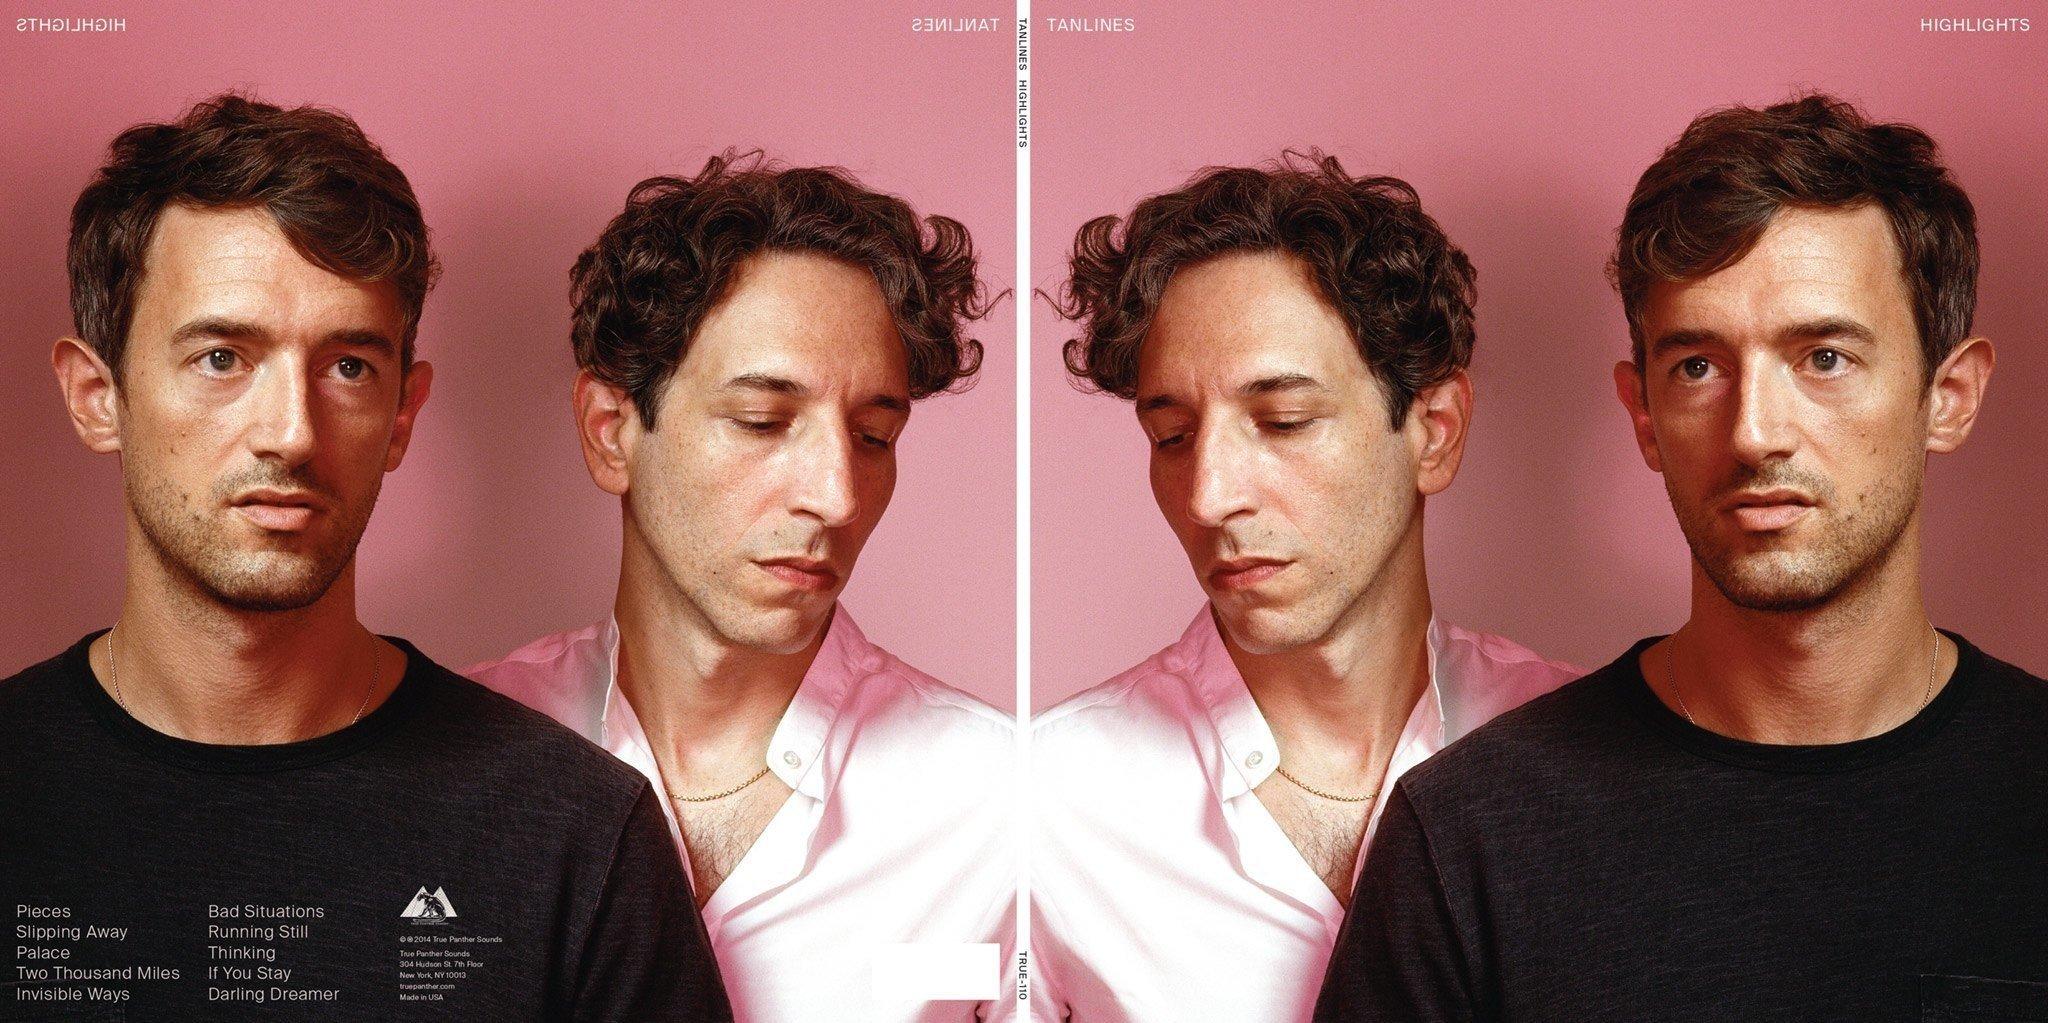 tanlines highlights cover